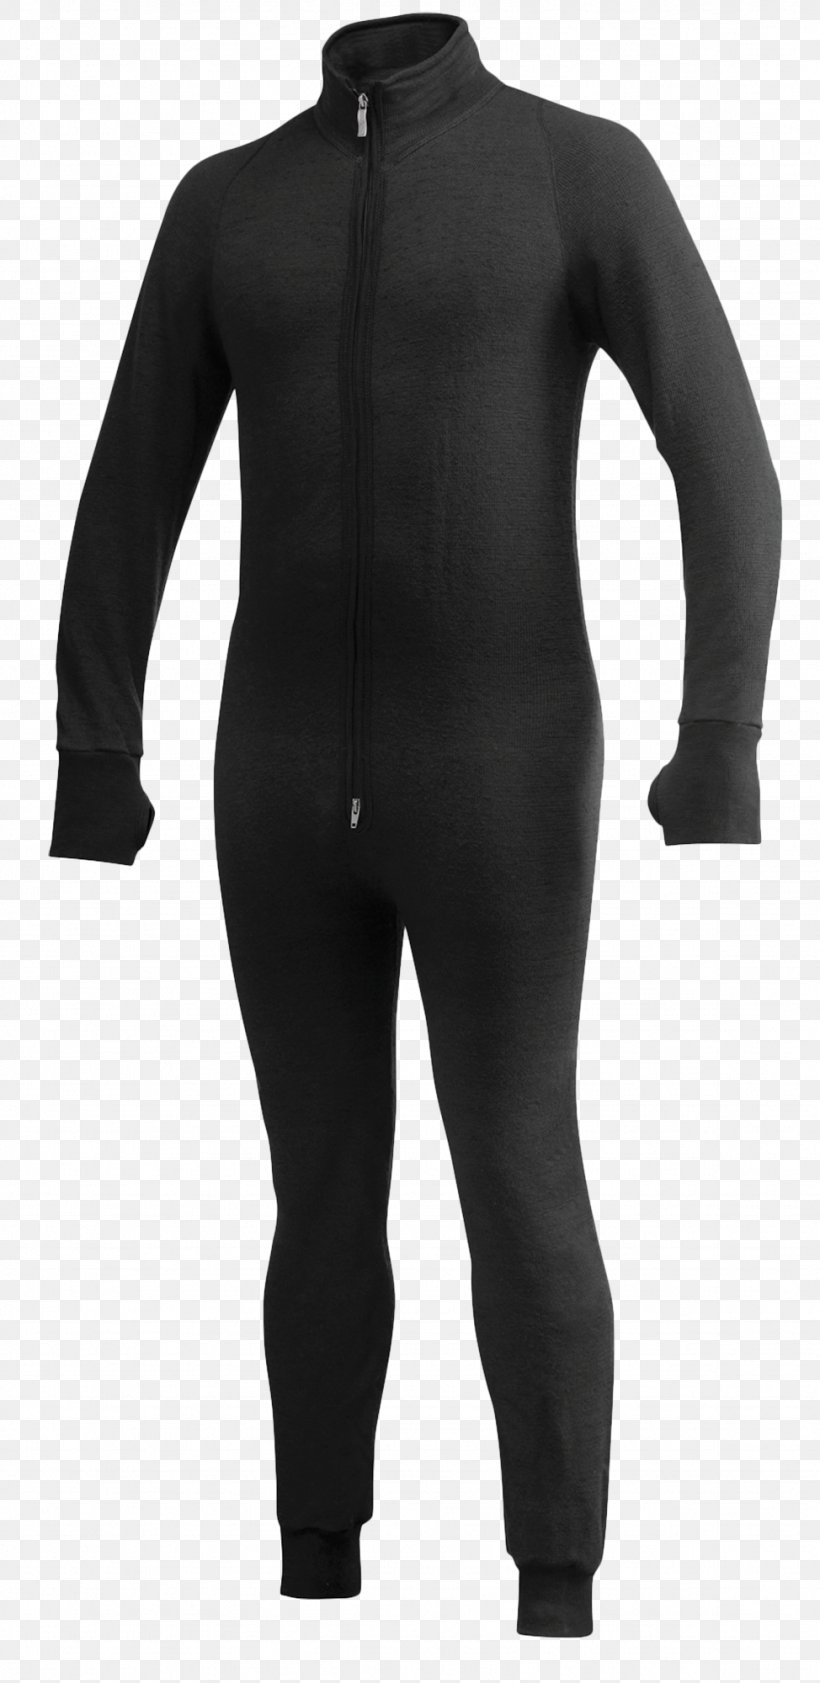 Wetsuit Surfing Clothing Free-diving Standup Paddleboarding, PNG, 974x2000px, Wetsuit, Billabong, Clothing, Dry Suit, Freediving Download Free